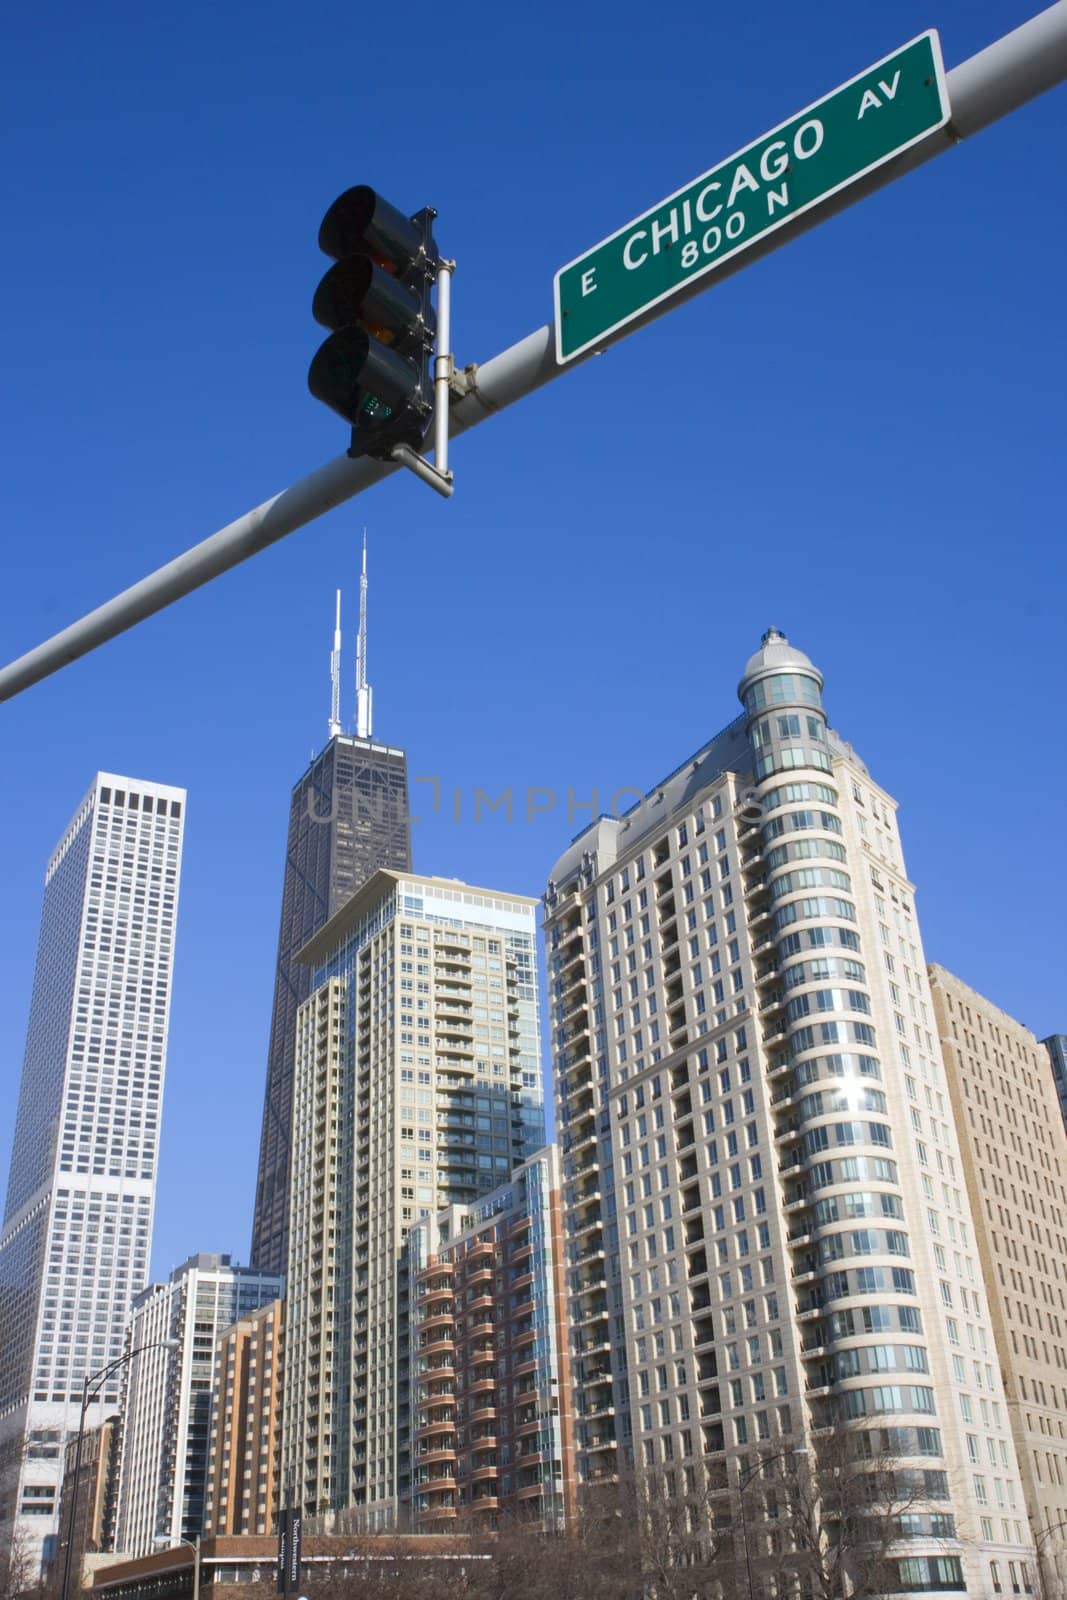 This is Chicago - seen from Lake Shore Drive